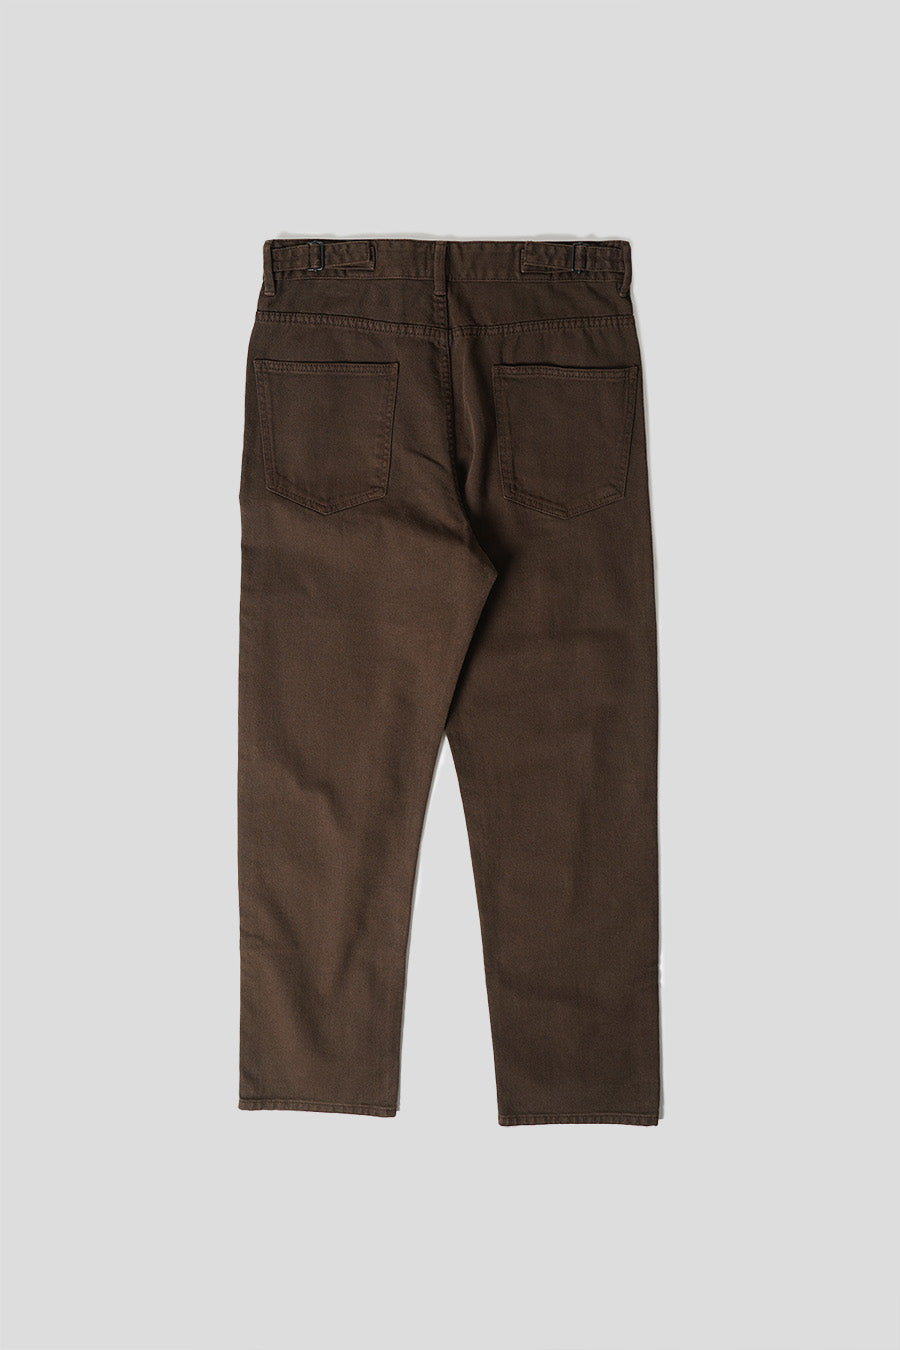 Lemaire CURVED 5 POCKET PANTS